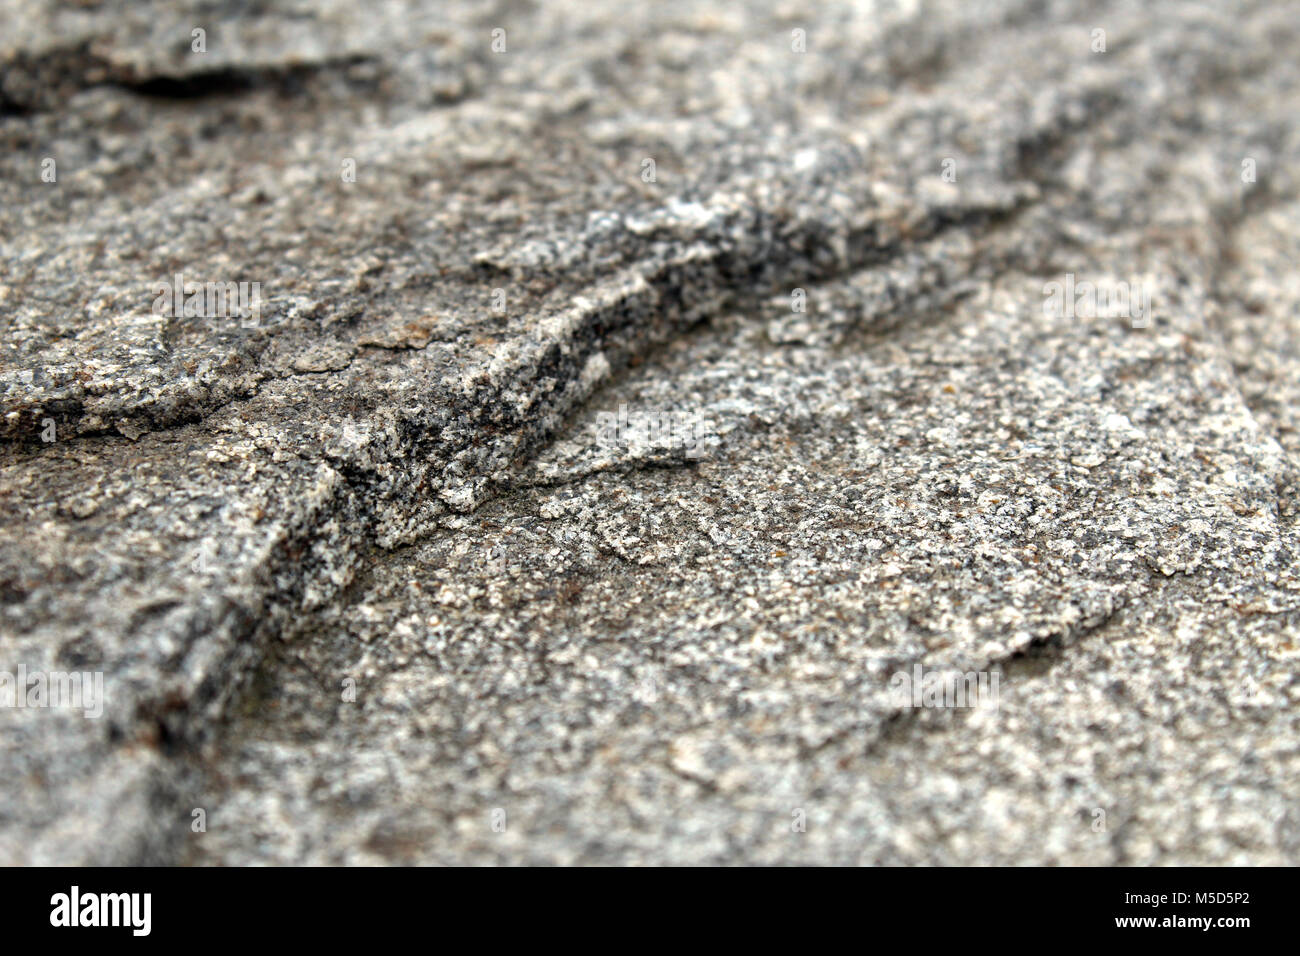 Fine-grained rough rock surface seen in detail Stock Photo